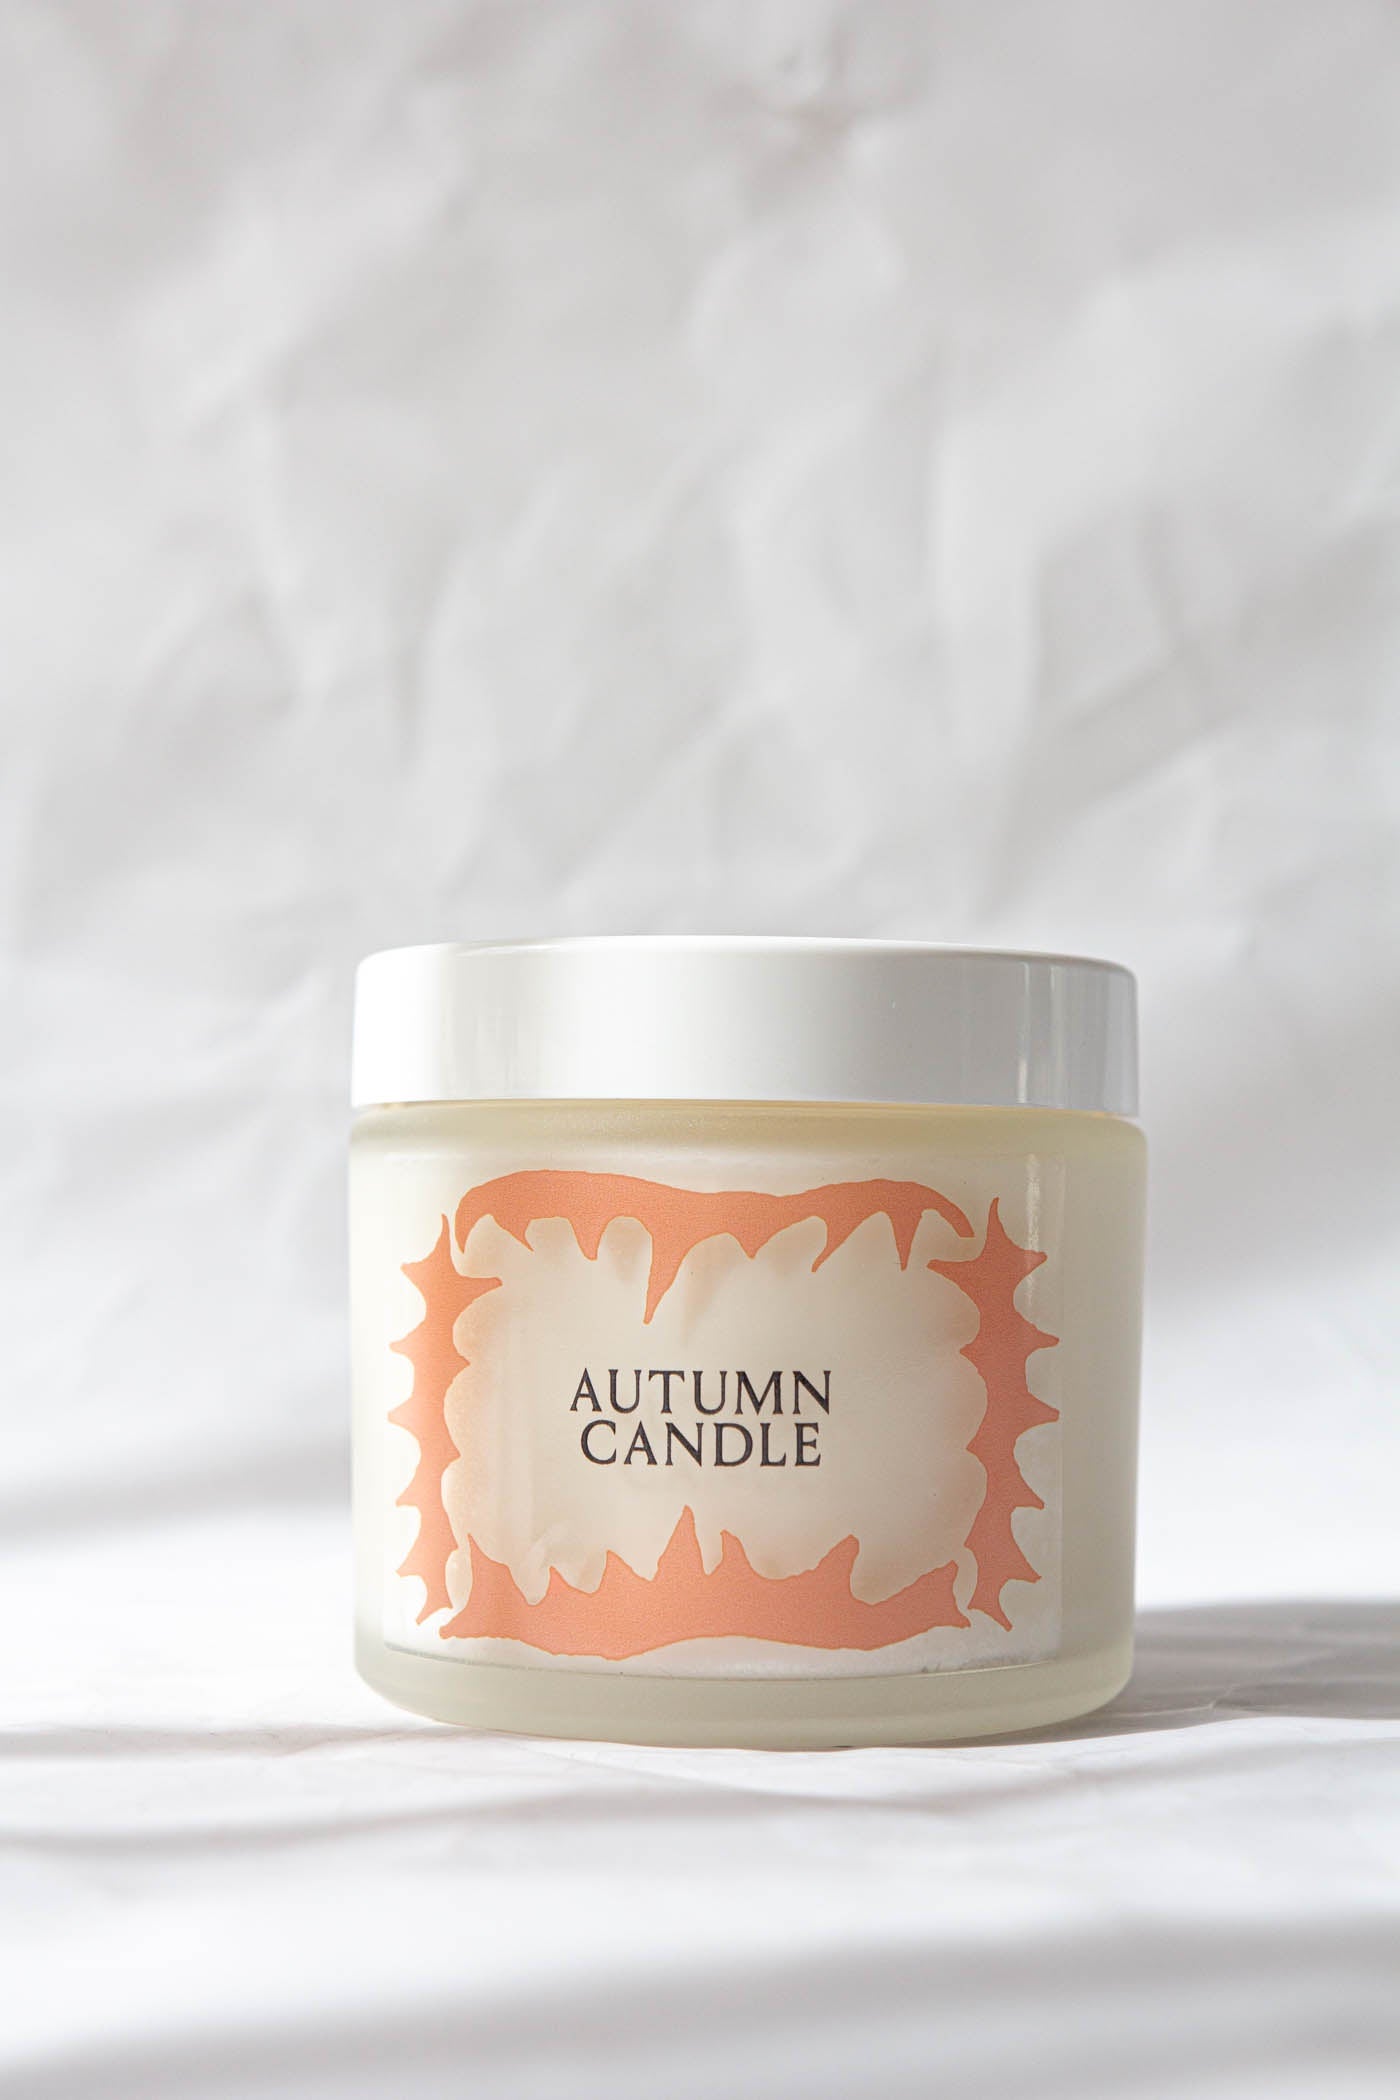 The Autumn Candle